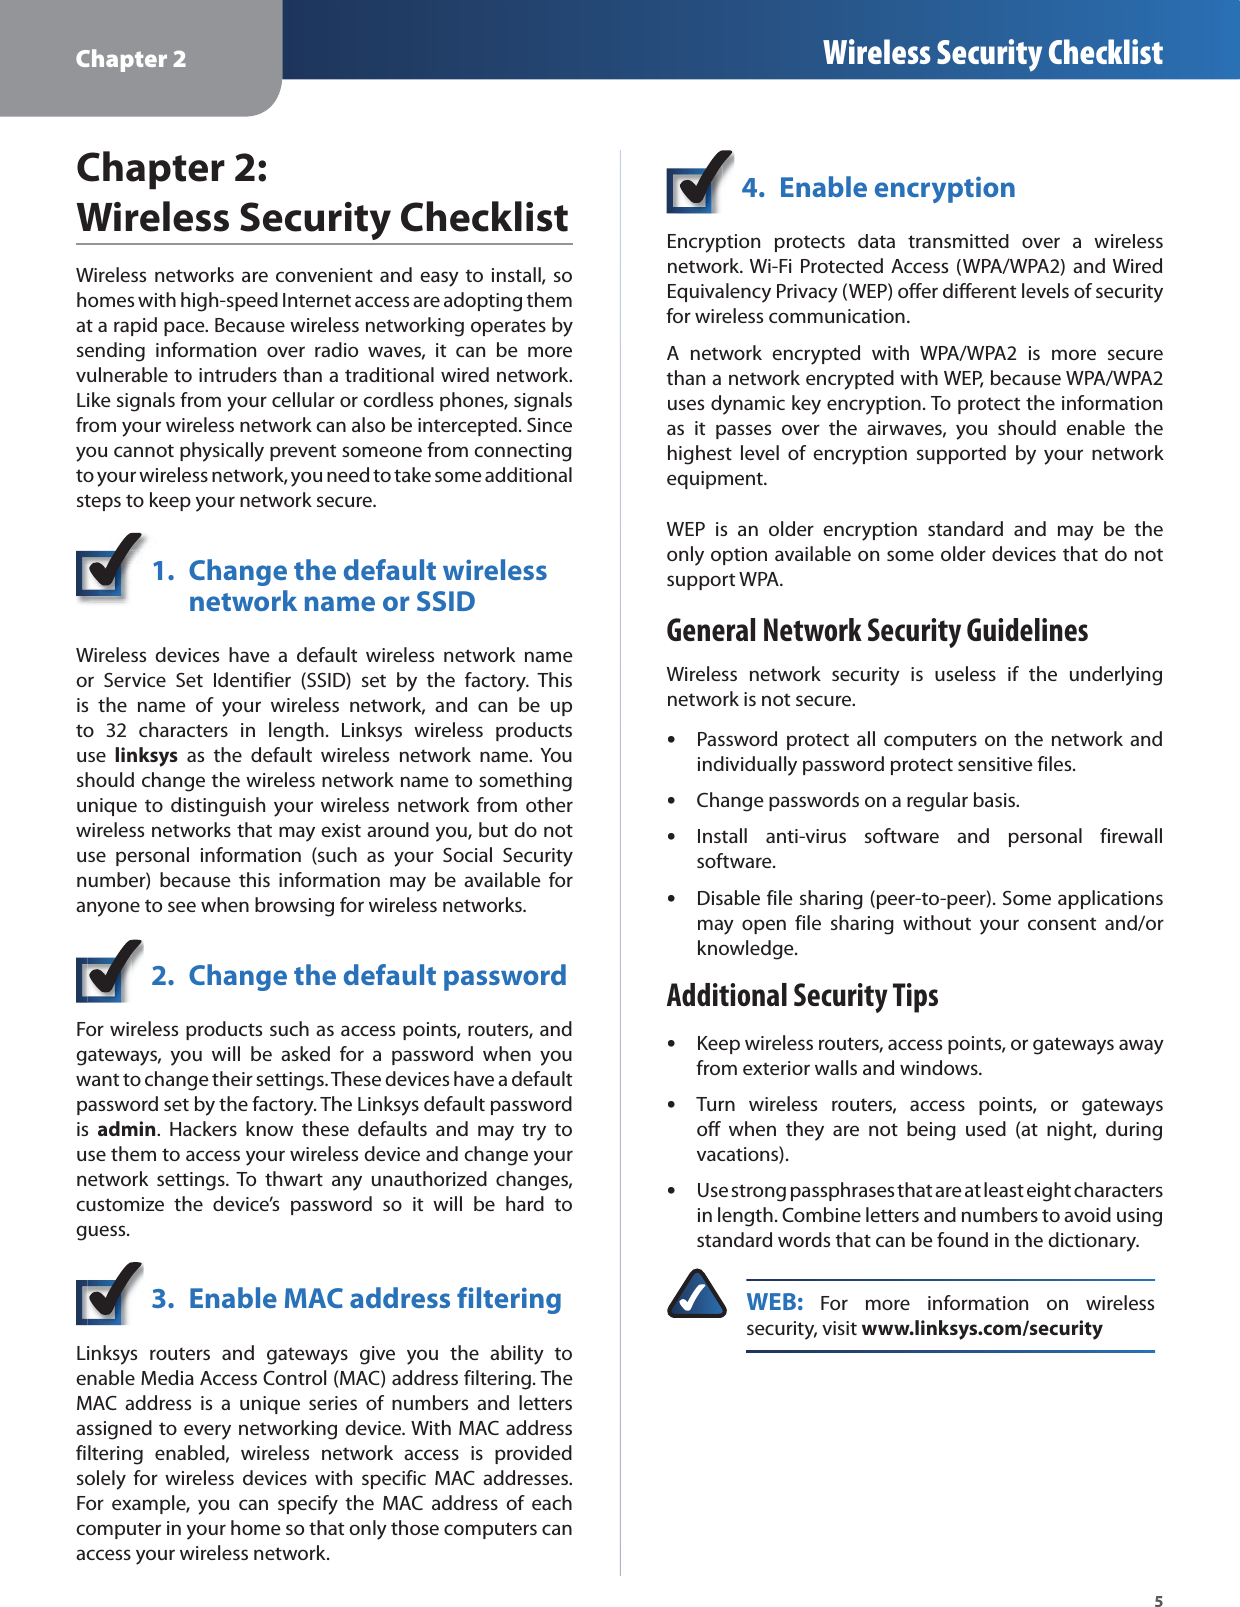 Chapter 2 Wireless Security Checklist5Chapter 2:  Wireless Security ChecklistWireless networks are convenient and easy to install, sohomes with high-speed Internet access are adopting themat a rapid pace. Because wireless networking operates bysending information over radio waves, it can be morevulnerable to intruders than a traditional wired network.Like signals from your cellular or cordless phones, signalsfrom your wireless network can also be intercepted. Sinceyou cannot physically prevent someone from connectingto your wireless network, you need to take some additionalsteps to keep your network secure.1. Change the default wireless network name or SSIDWireless devices have a default wireless network nameor Service Set Identifier (SSID) set by the factory. Thisis the name of your wireless network, and can be upto 32 characters in length. Linksys wireless productsuselinksys as the default wireless network name. Youshould change the wireless network name to somethingunique to distinguish your wireless network from otherwireless networks that may exist around you, but do notuse personal information (such as your Social Securitynumber) because this information may be available foranyone to see when browsing for wireless networks.2. Change the default passwordFor wireless products such as access points, routers, andgateways, you will be asked for a password when youwant to change their settings. These devices have a defaultpassword set by the factory. The Linksys default passwordisadmin. Hackers know these defaults and may try touse them to access your wireless device and change yournetwork settings. To thwart any unauthorized changes,customize the device’s password so it will be hard toguess.3. Enable MAC address filteringLinksys routers and gateways give you the ability toenable Media Access Control (MAC) address filtering. TheMAC address is a unique series of numbers and lettersassigned to every networking device. With MAC addressfiltering enabled, wireless network access is providedsolely for wireless devices with specific MAC addresses.For example, you can specify the MAC address of eachcomputer in your home so that only those computers canaccess your wireless network. 4. Enable encryptionEncryption protects data transmitted over a wirelessnetwork. Wi-Fi Protected Access (WPA/WPA2) and WiredEquivalency Privacy (WEP) offer different levels of securityfor wireless communication.A network encrypted with WPA/WPA2 is more securethan a network encrypted with WEP, because WPA/WPA2uses dynamic key encryption. To protect the informationas it passes over the airwaves, you should enable thehighest level of encryption supported by your network equipment.WEP is an older encryption standard and may be theonly option available on some older devices that do notsupport WPA.General Network Security GuidelinesWireless network security is useless if the underlyingnetwork is not secure.Password protect all computers on the network andsindividually password protect sensitive files.Change passwords on a regular basis.sInstall anti-virus software and personal firewallssoftware.Disable file sharing (peer-to-peer). Some applicationssmay open file sharing without your consent and/orknowledge.Additional Security TipsKeep wireless routers, access points, or gateways awaysfrom exterior walls and windows.Turn wireless routers, access points, or gatewayssoff when they are not being used (at night, duringvacations).Use strong passphrases that are at least eight characterssin length. Combine letters and numbers to avoid usingstandard words that can be found in the dictionary.WEB: For more information on wirelesssecurity, visit www.linksys.com/security